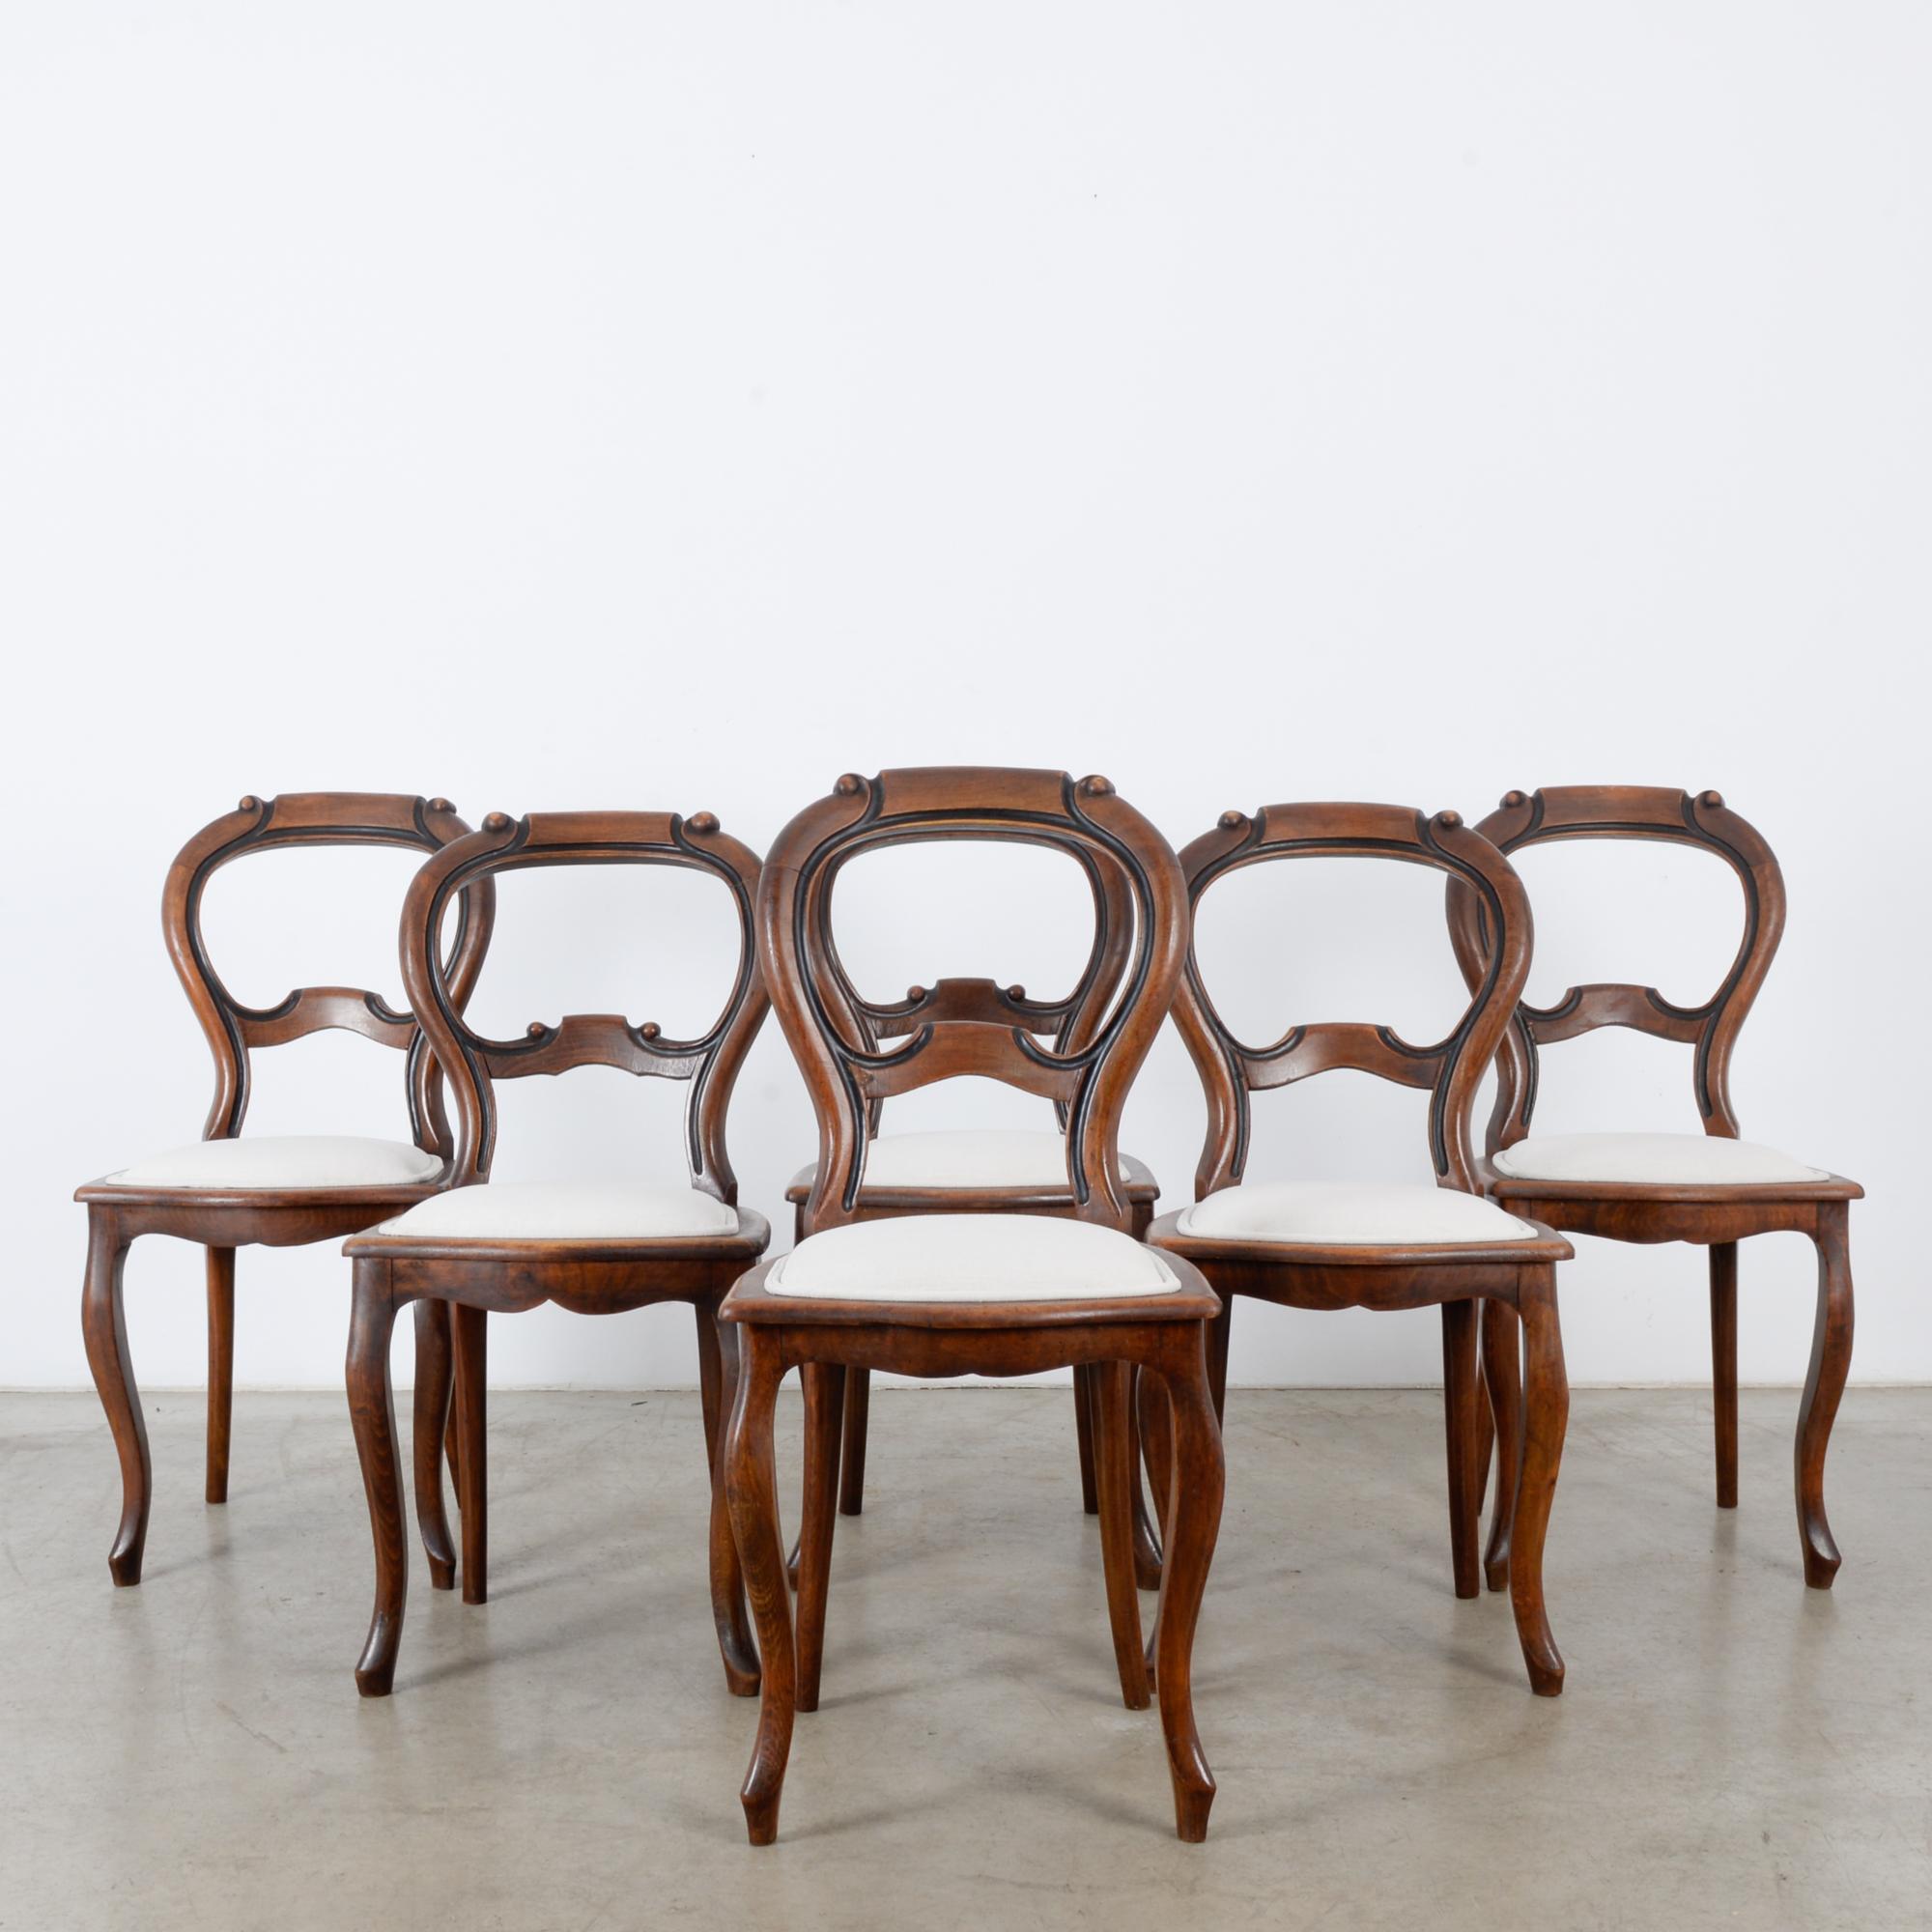 This set of six wooden dining chairs was made in France, circa 1900. The cabriole front legs echo the balloon back, which features a darkened, rounded ridge. The rear legs splay outward slightly. A re-upholstered cream seat on each chair sets off